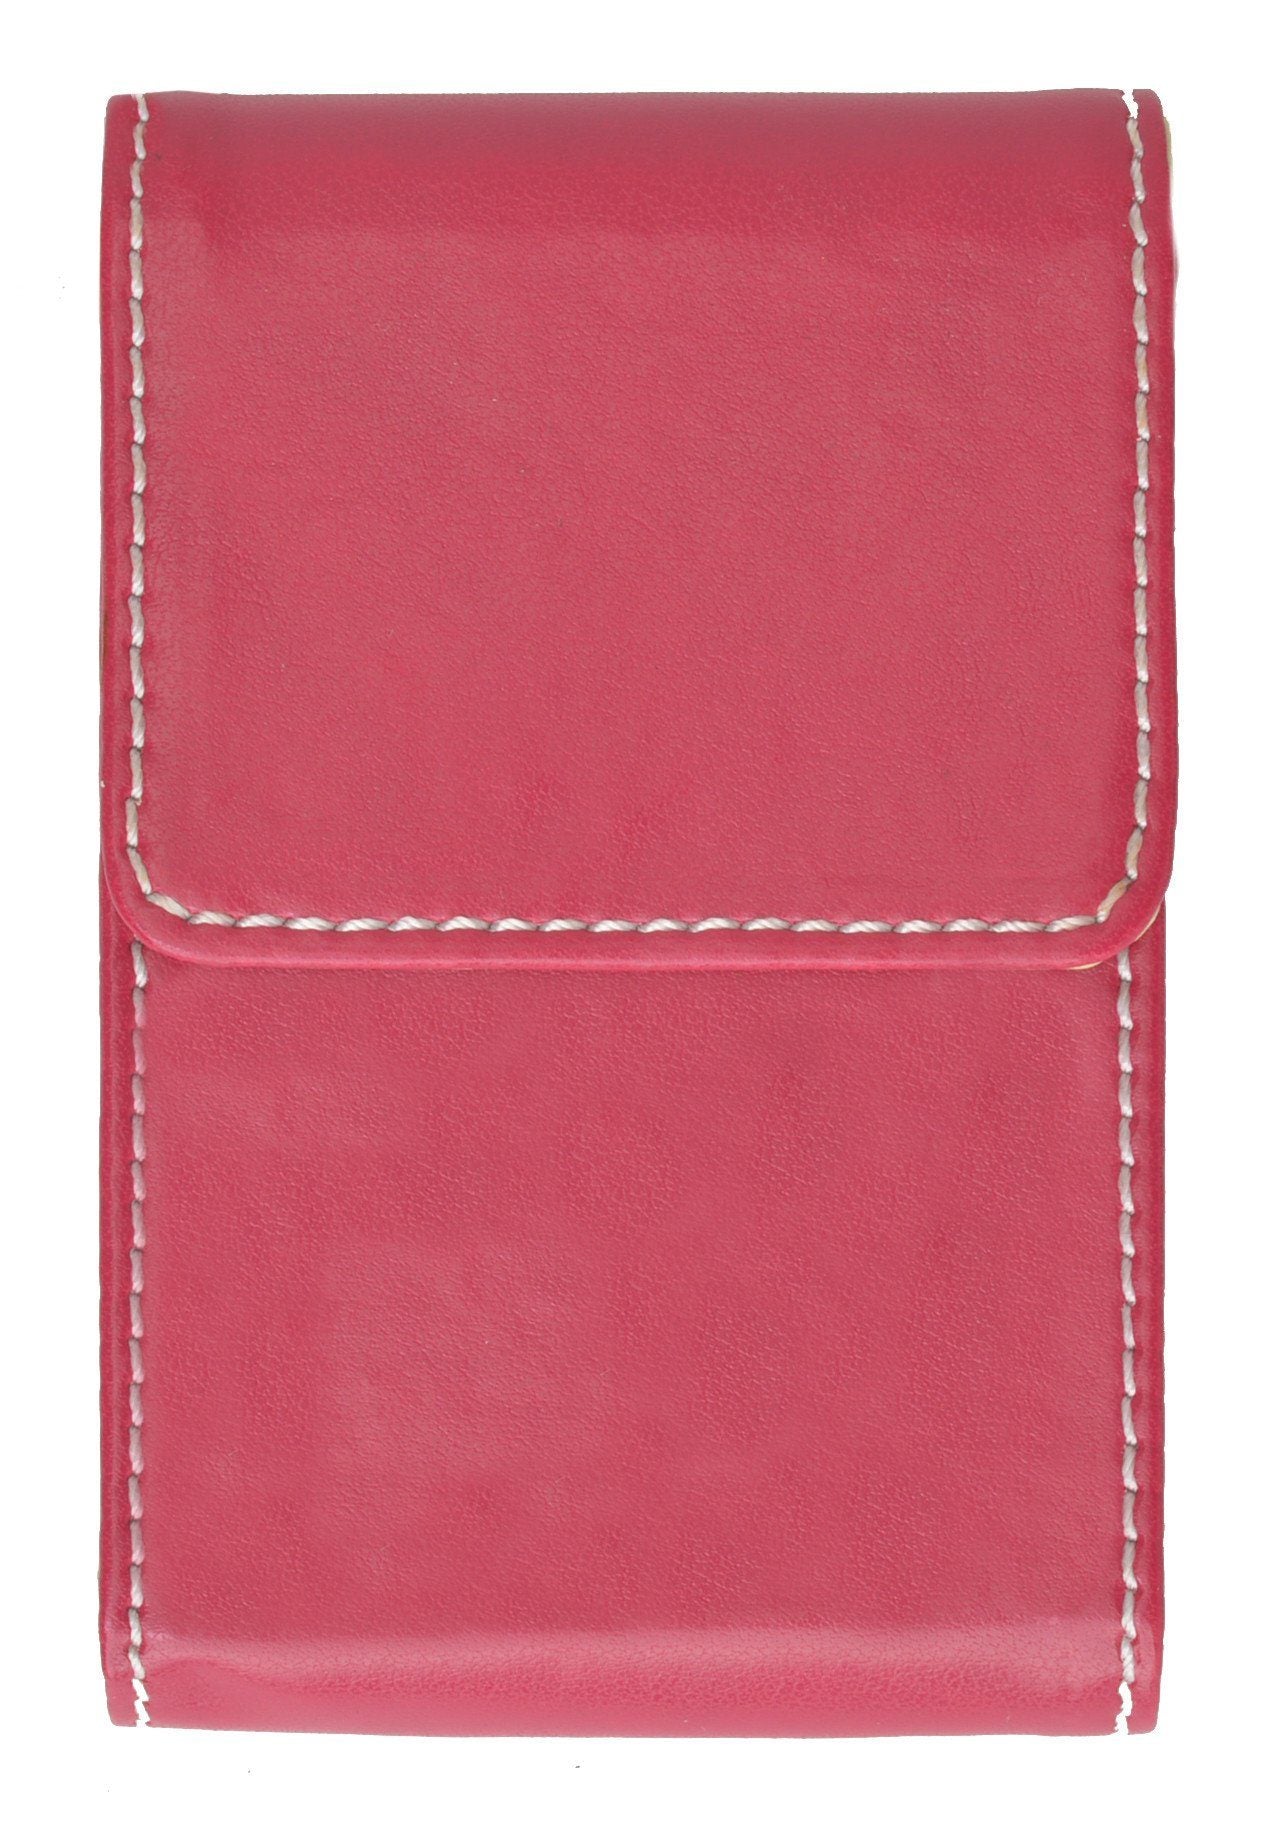 Genuine Leather Pull out Credit Cards holder